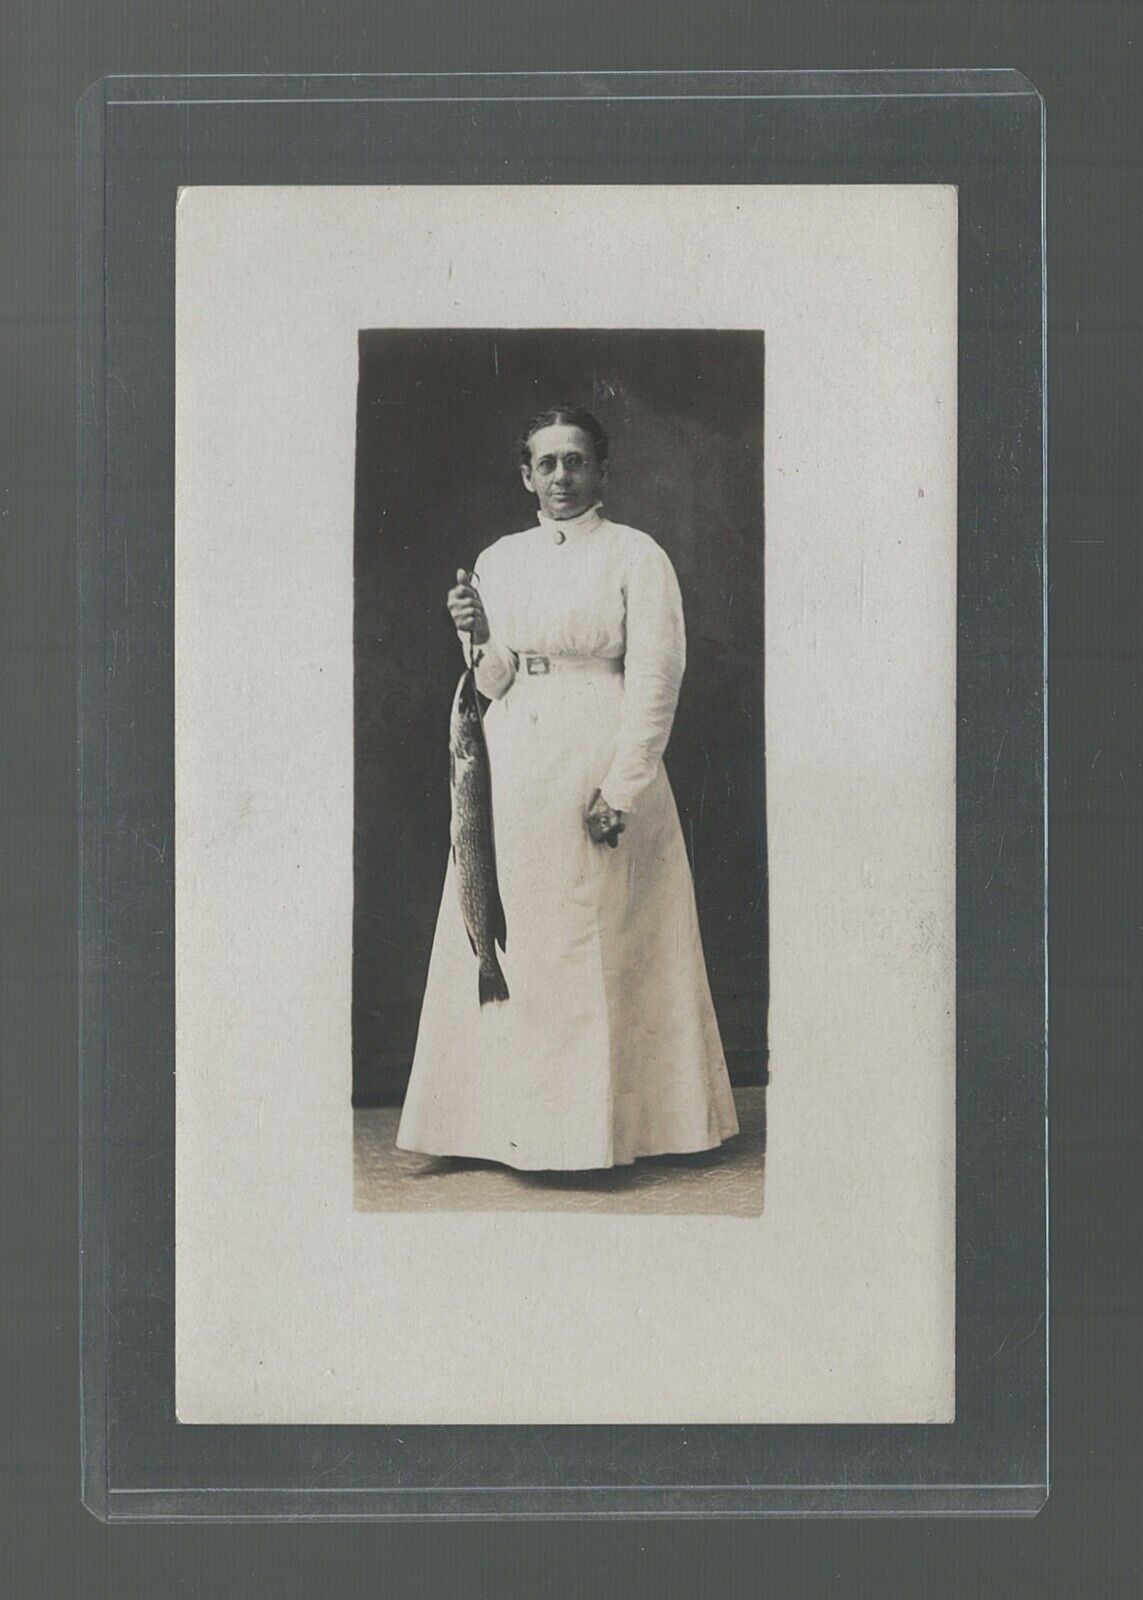 RPPC Lady In A White Dress Holding A Northern Pike Fish Stringer